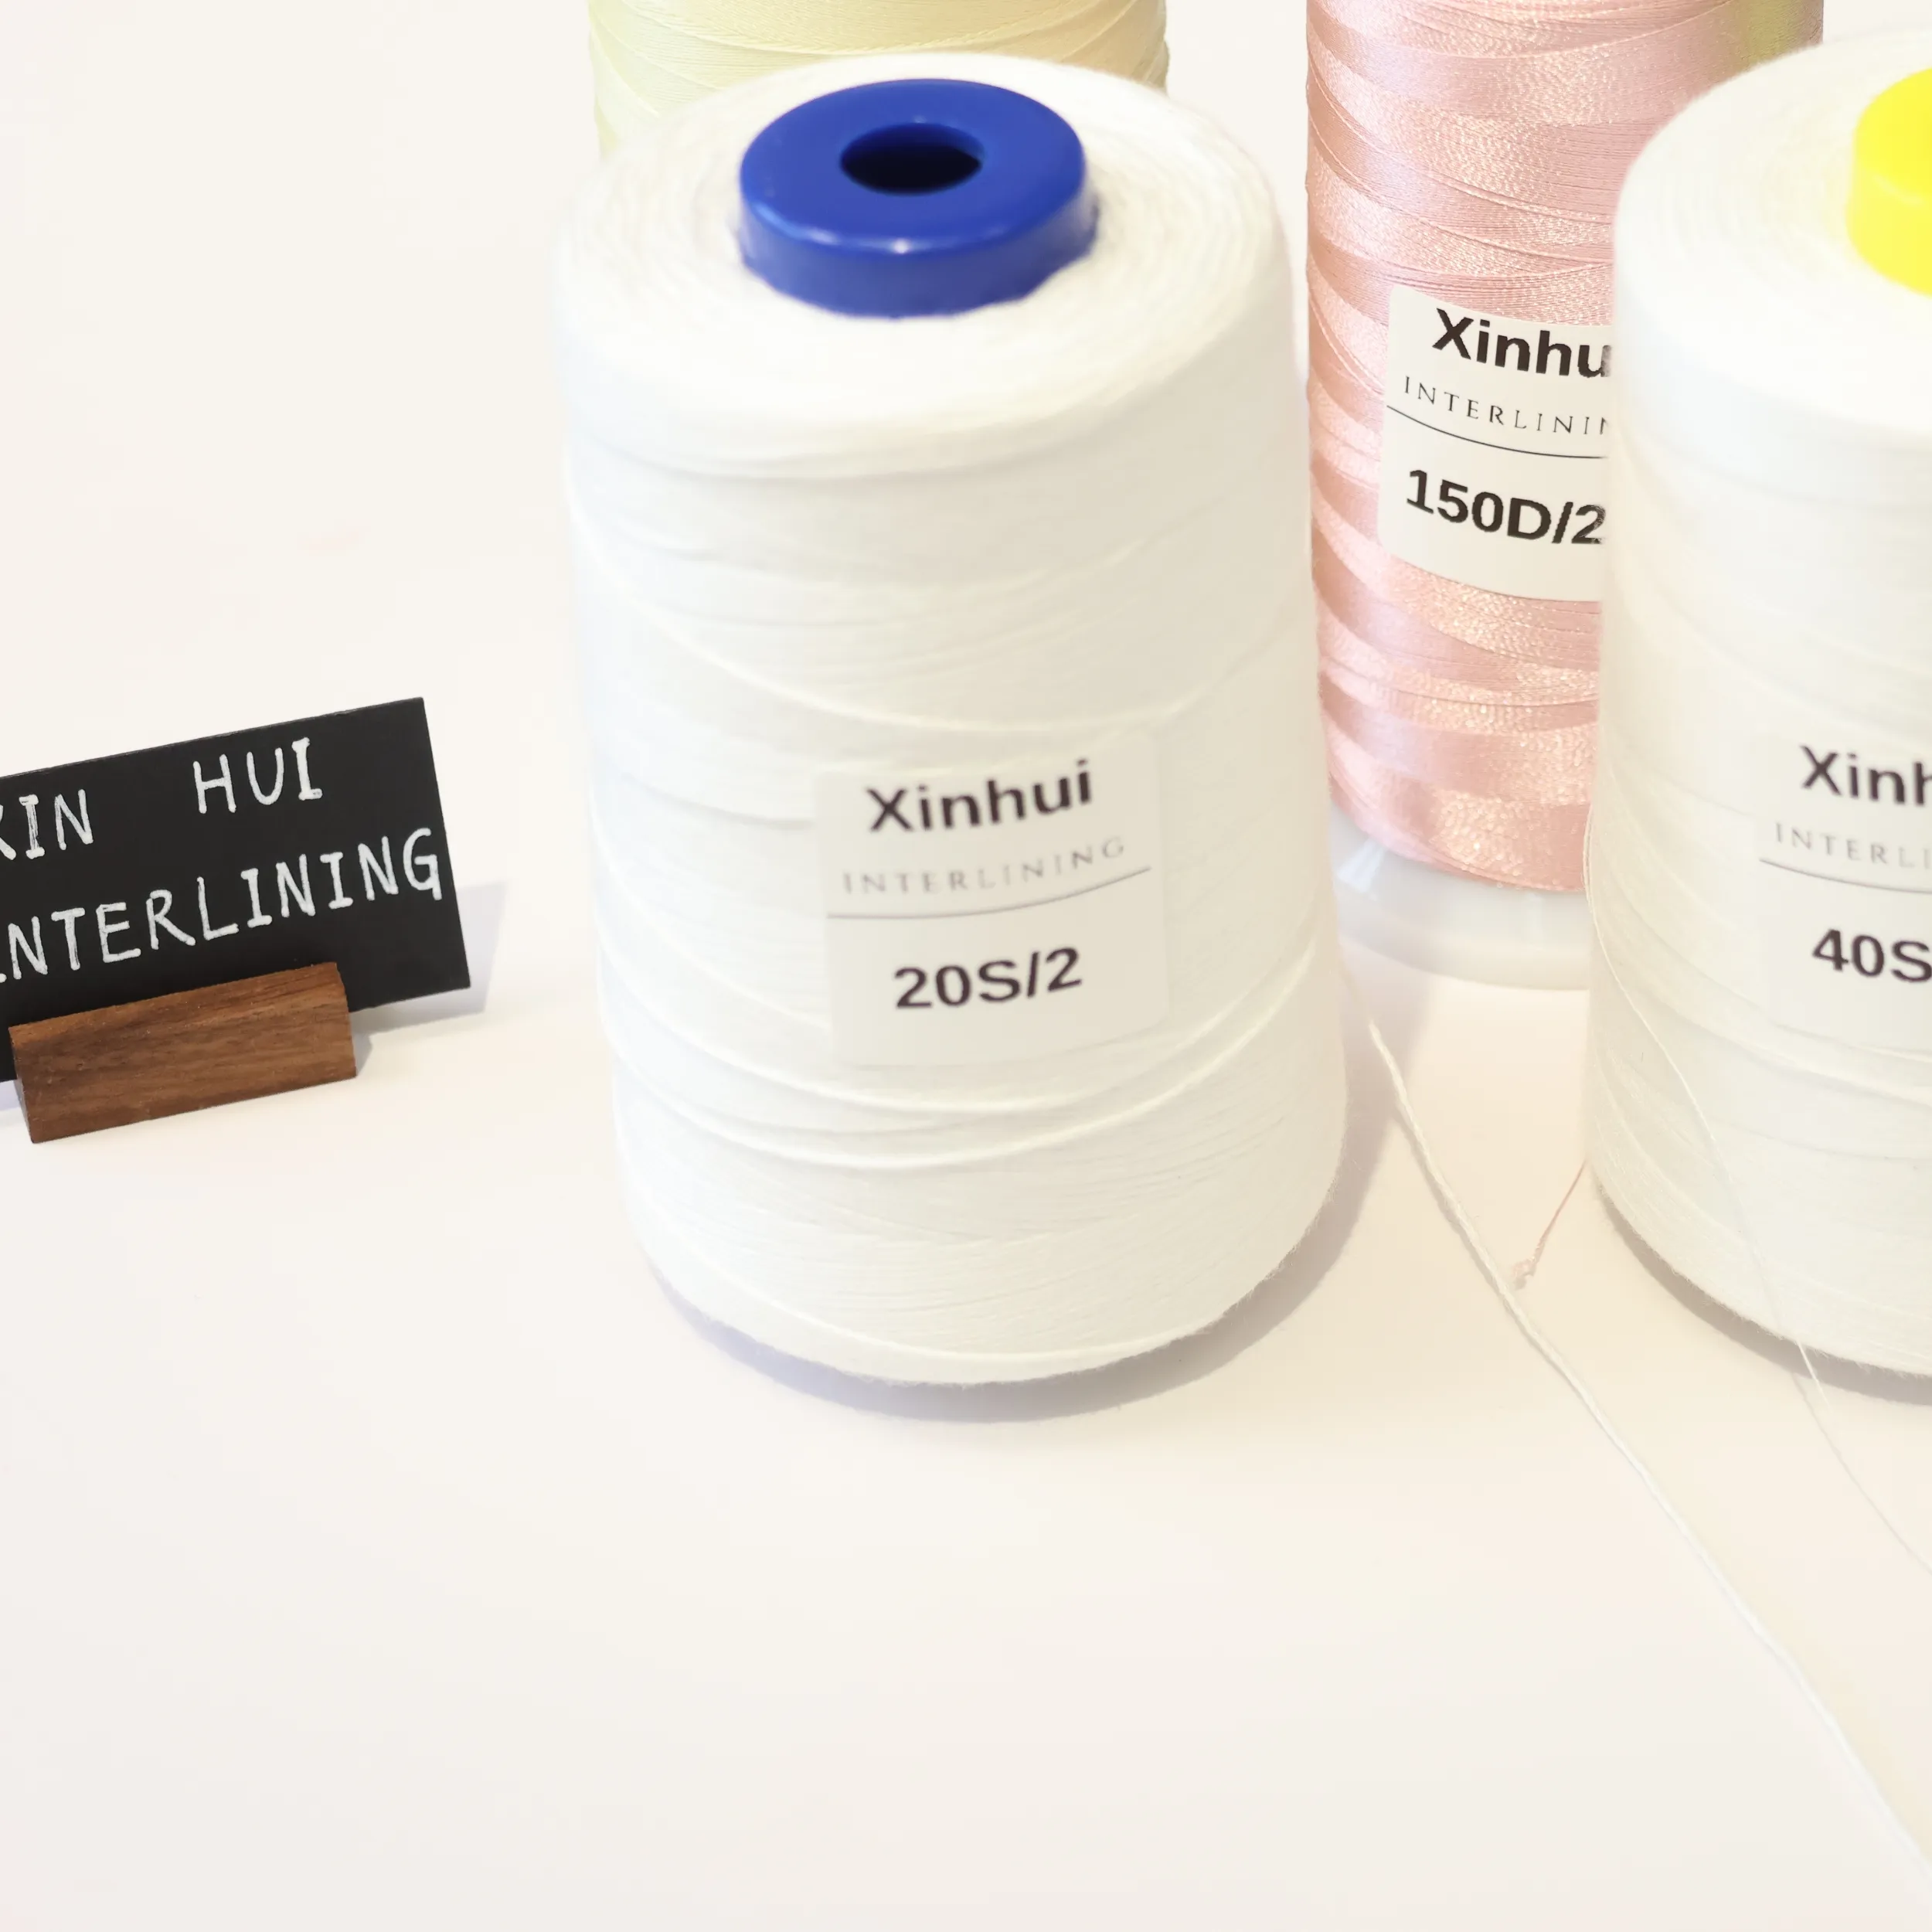 Good quality 120D/2 100% Viscose Rayon Embroidery Thread 4500yds for Shali Local Dress